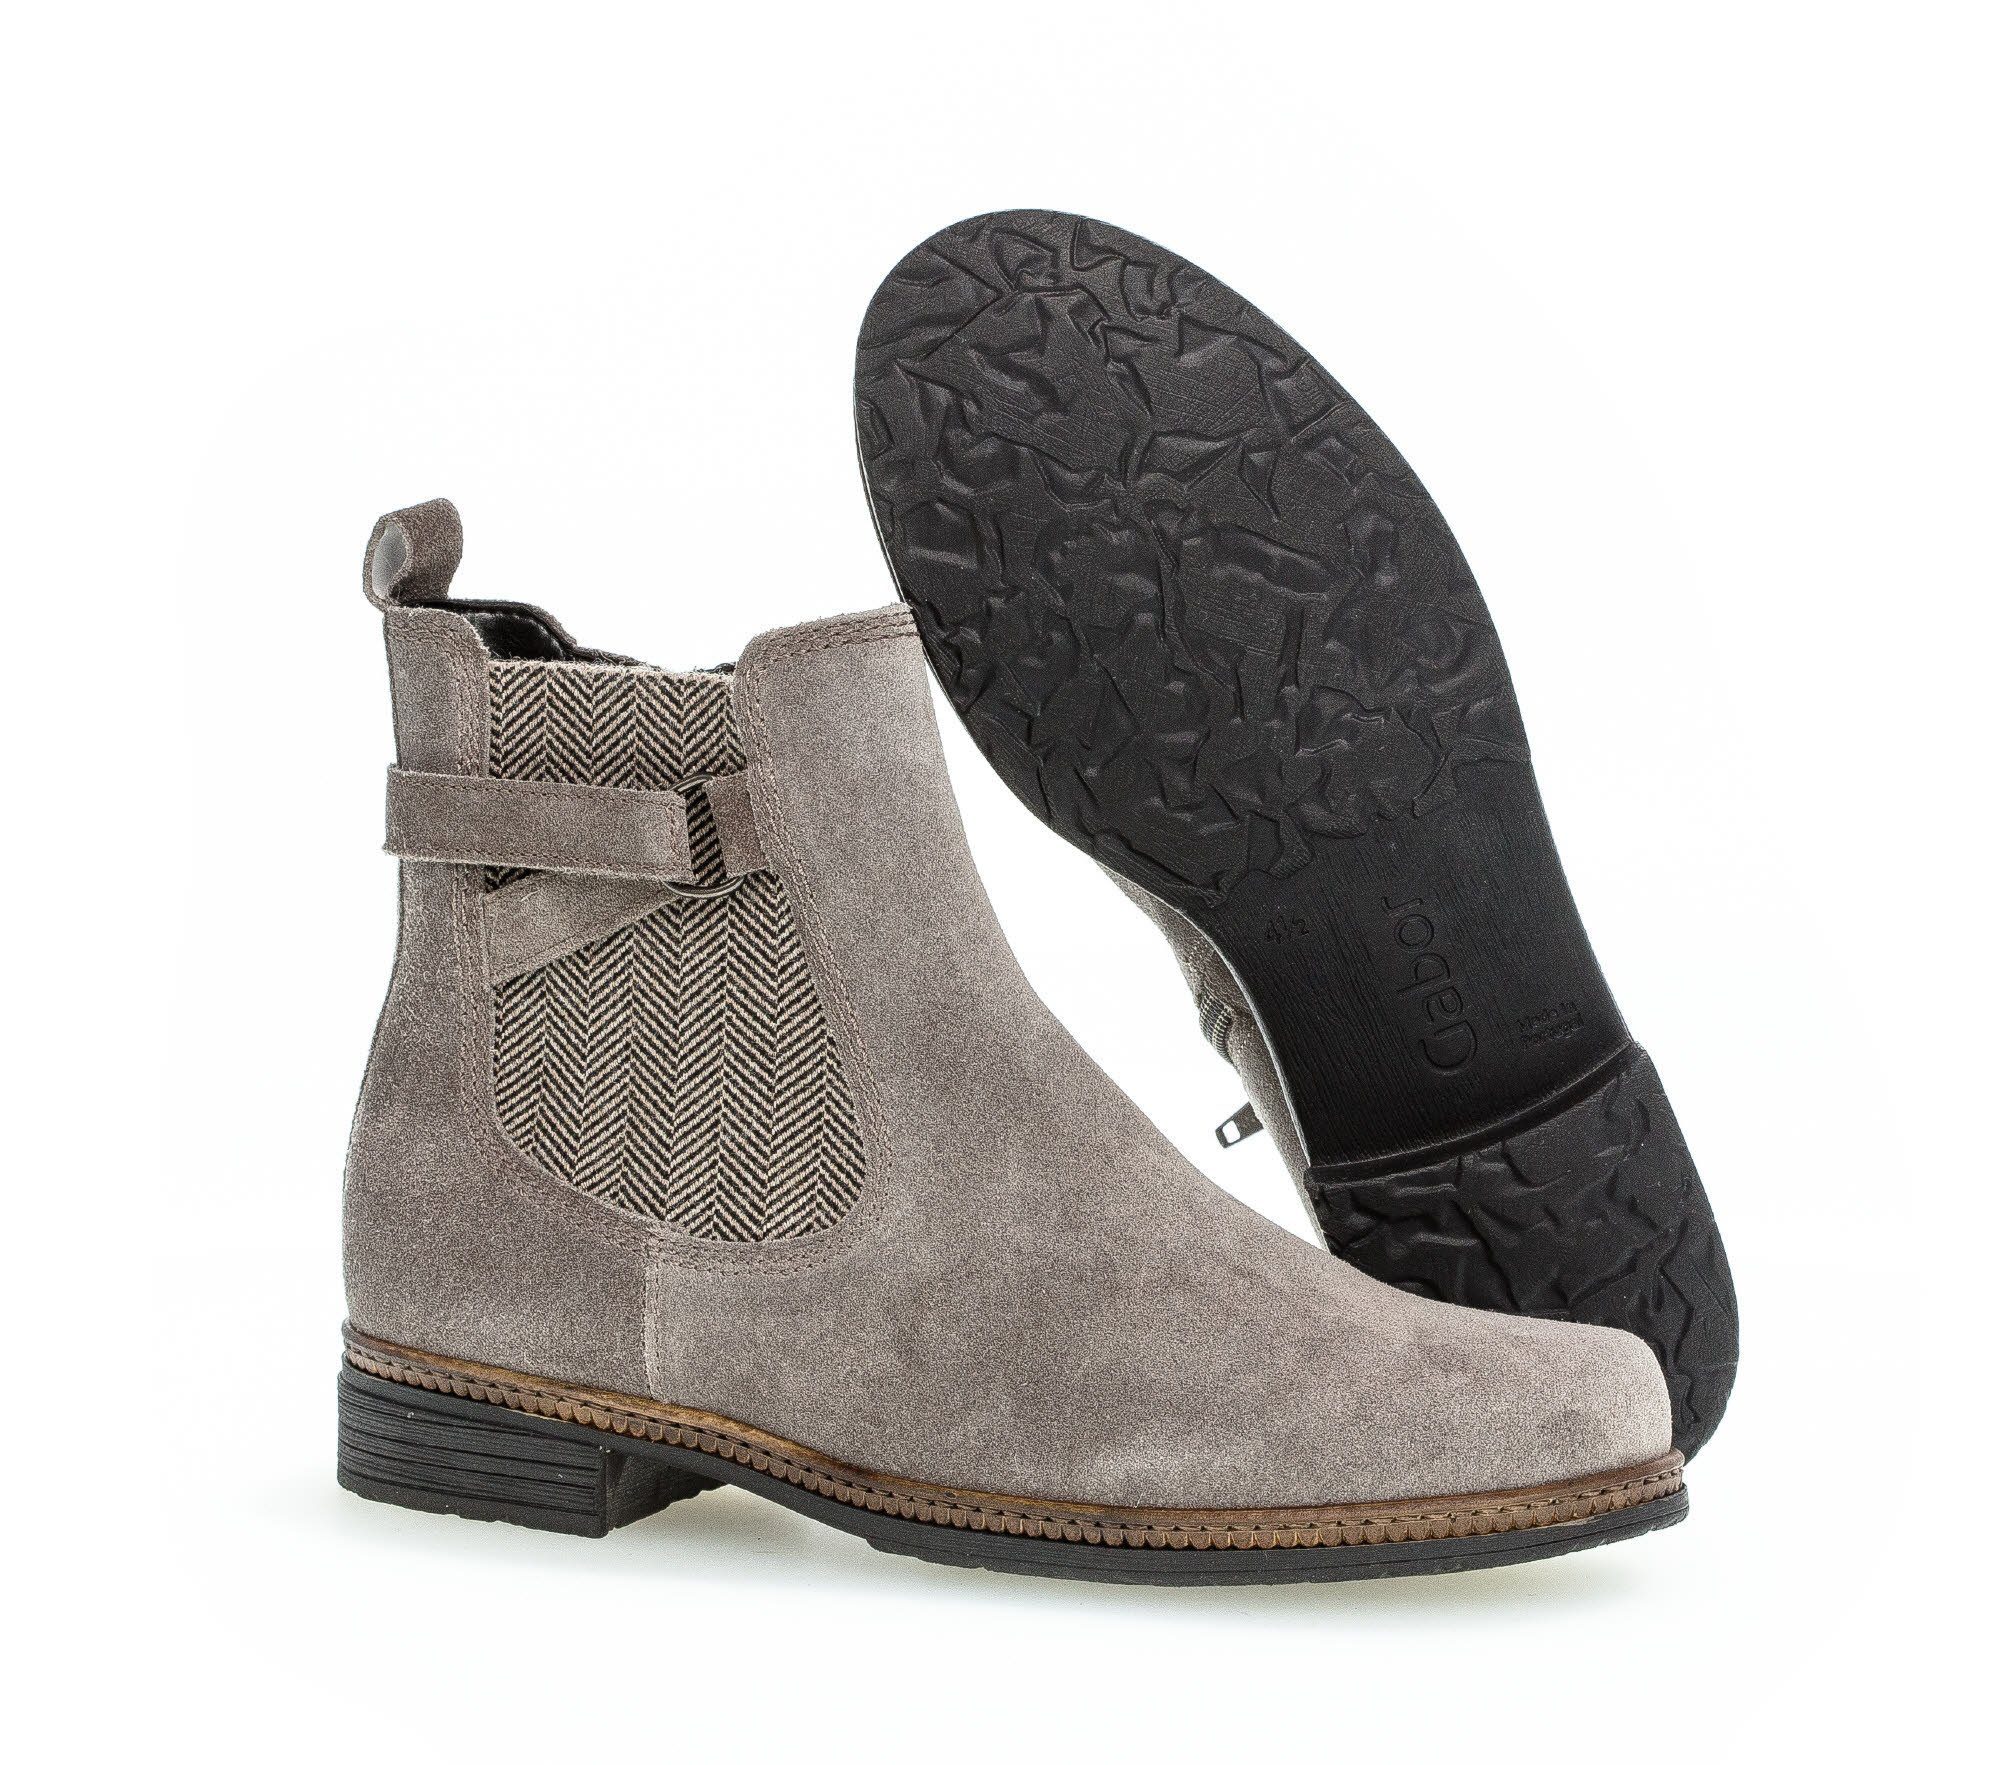 Gabor 94.670.19 Chelseaboots Braun (wallaby)